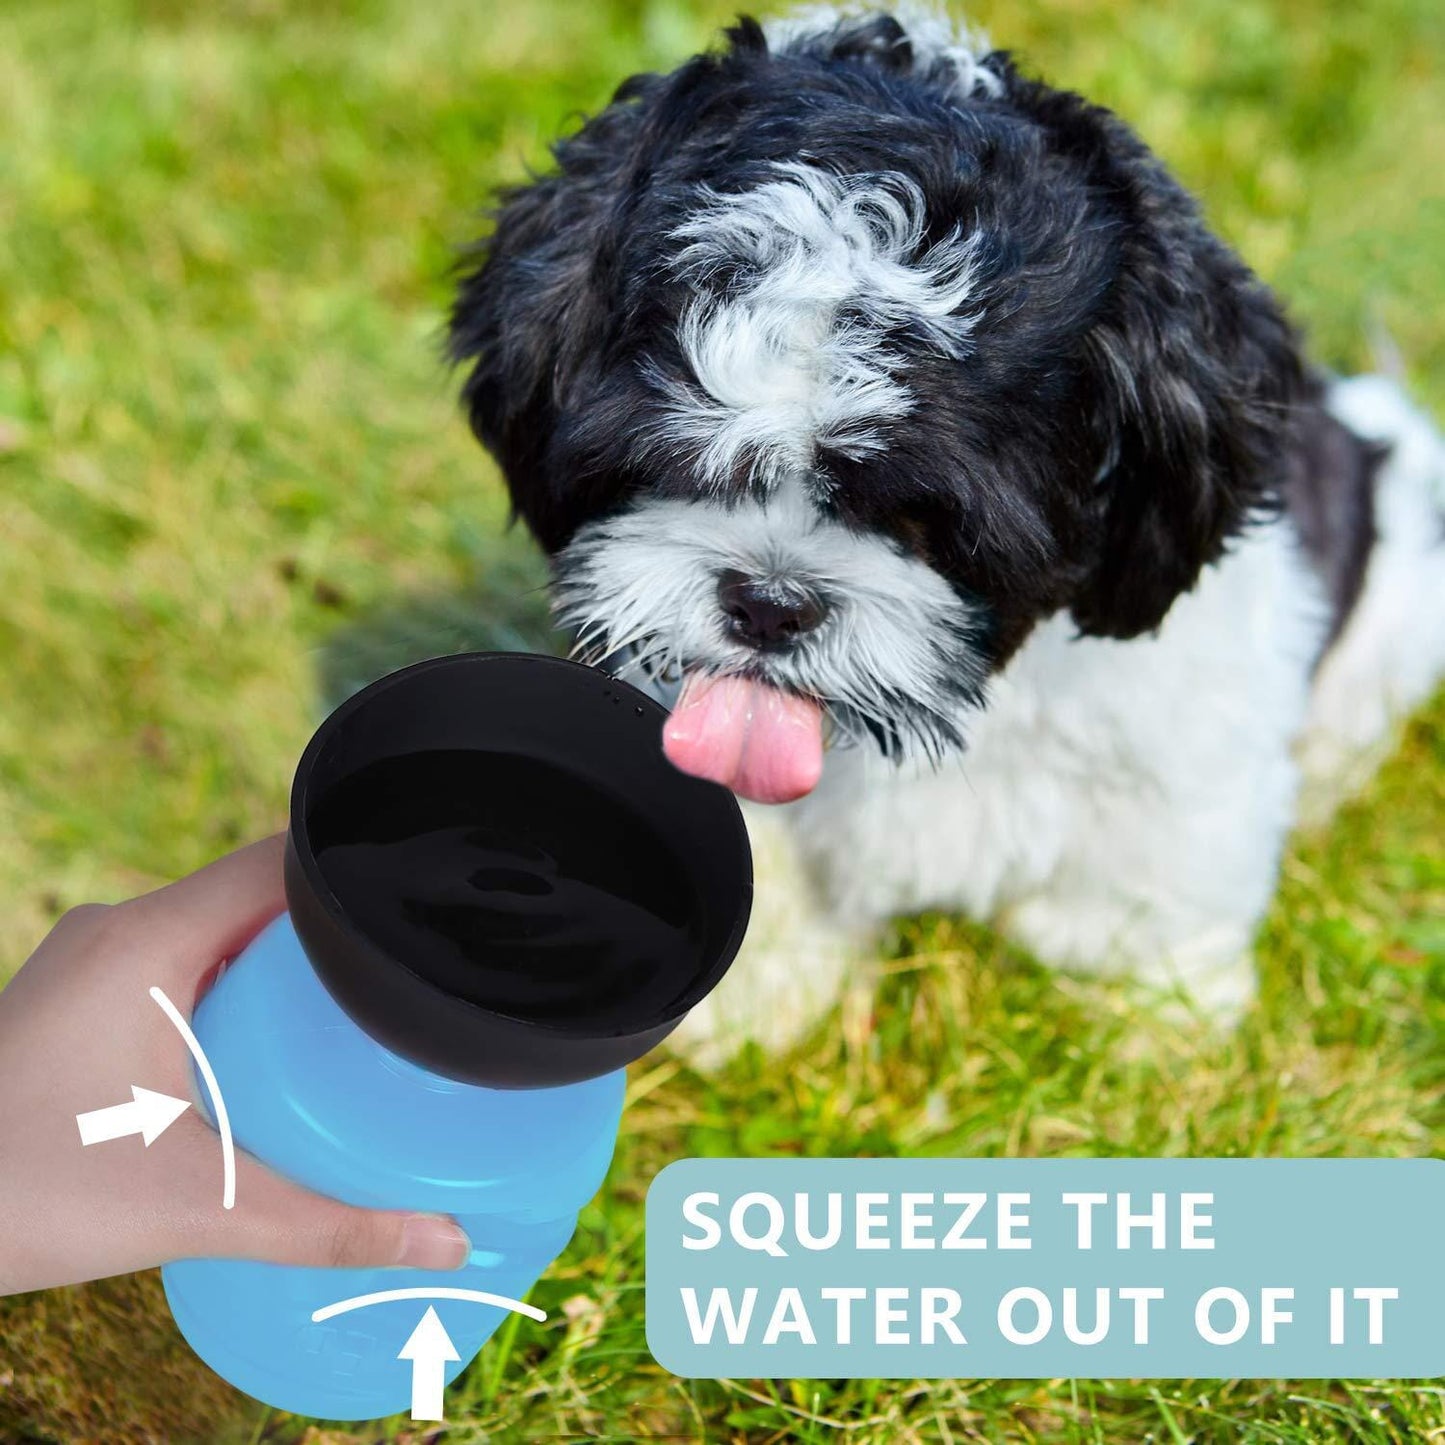 MagiCup™ - Portable water cup for dogs